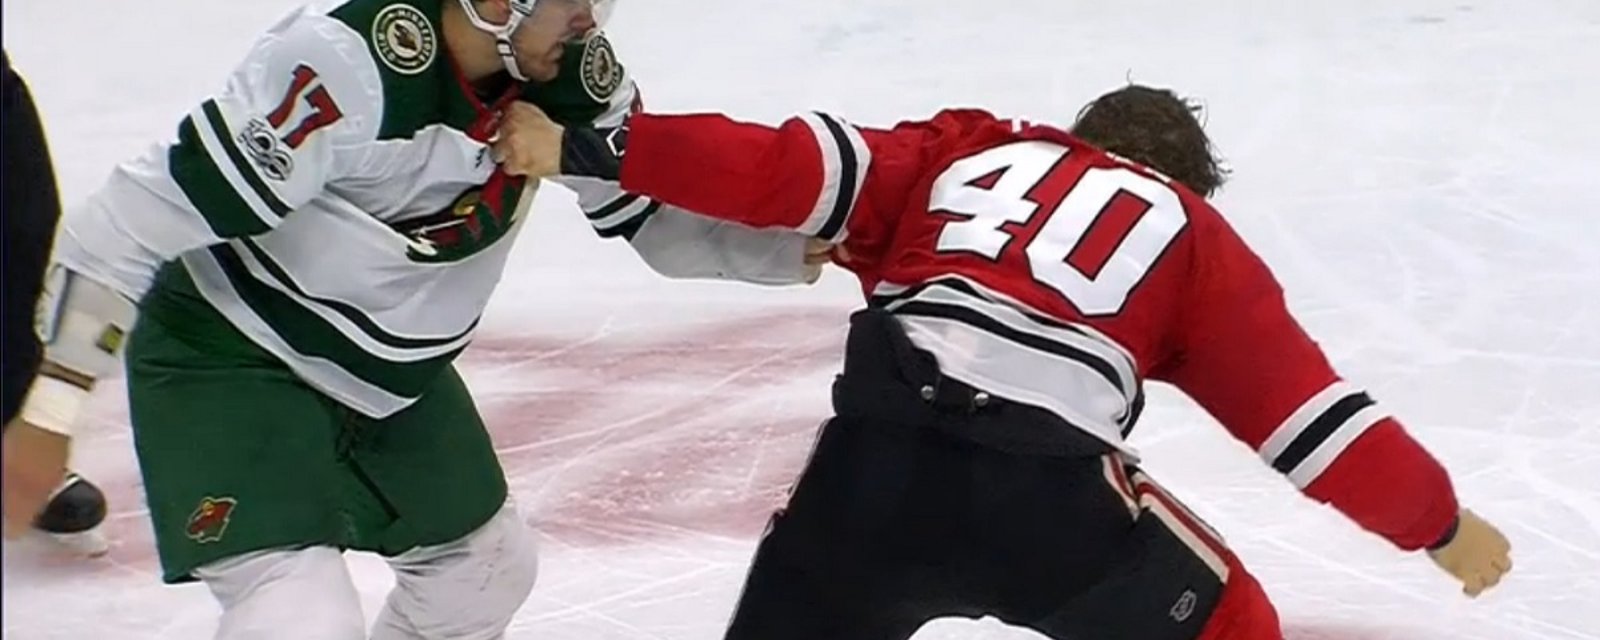 Your replay: Hayden lands the biggest punch of the NHL season!